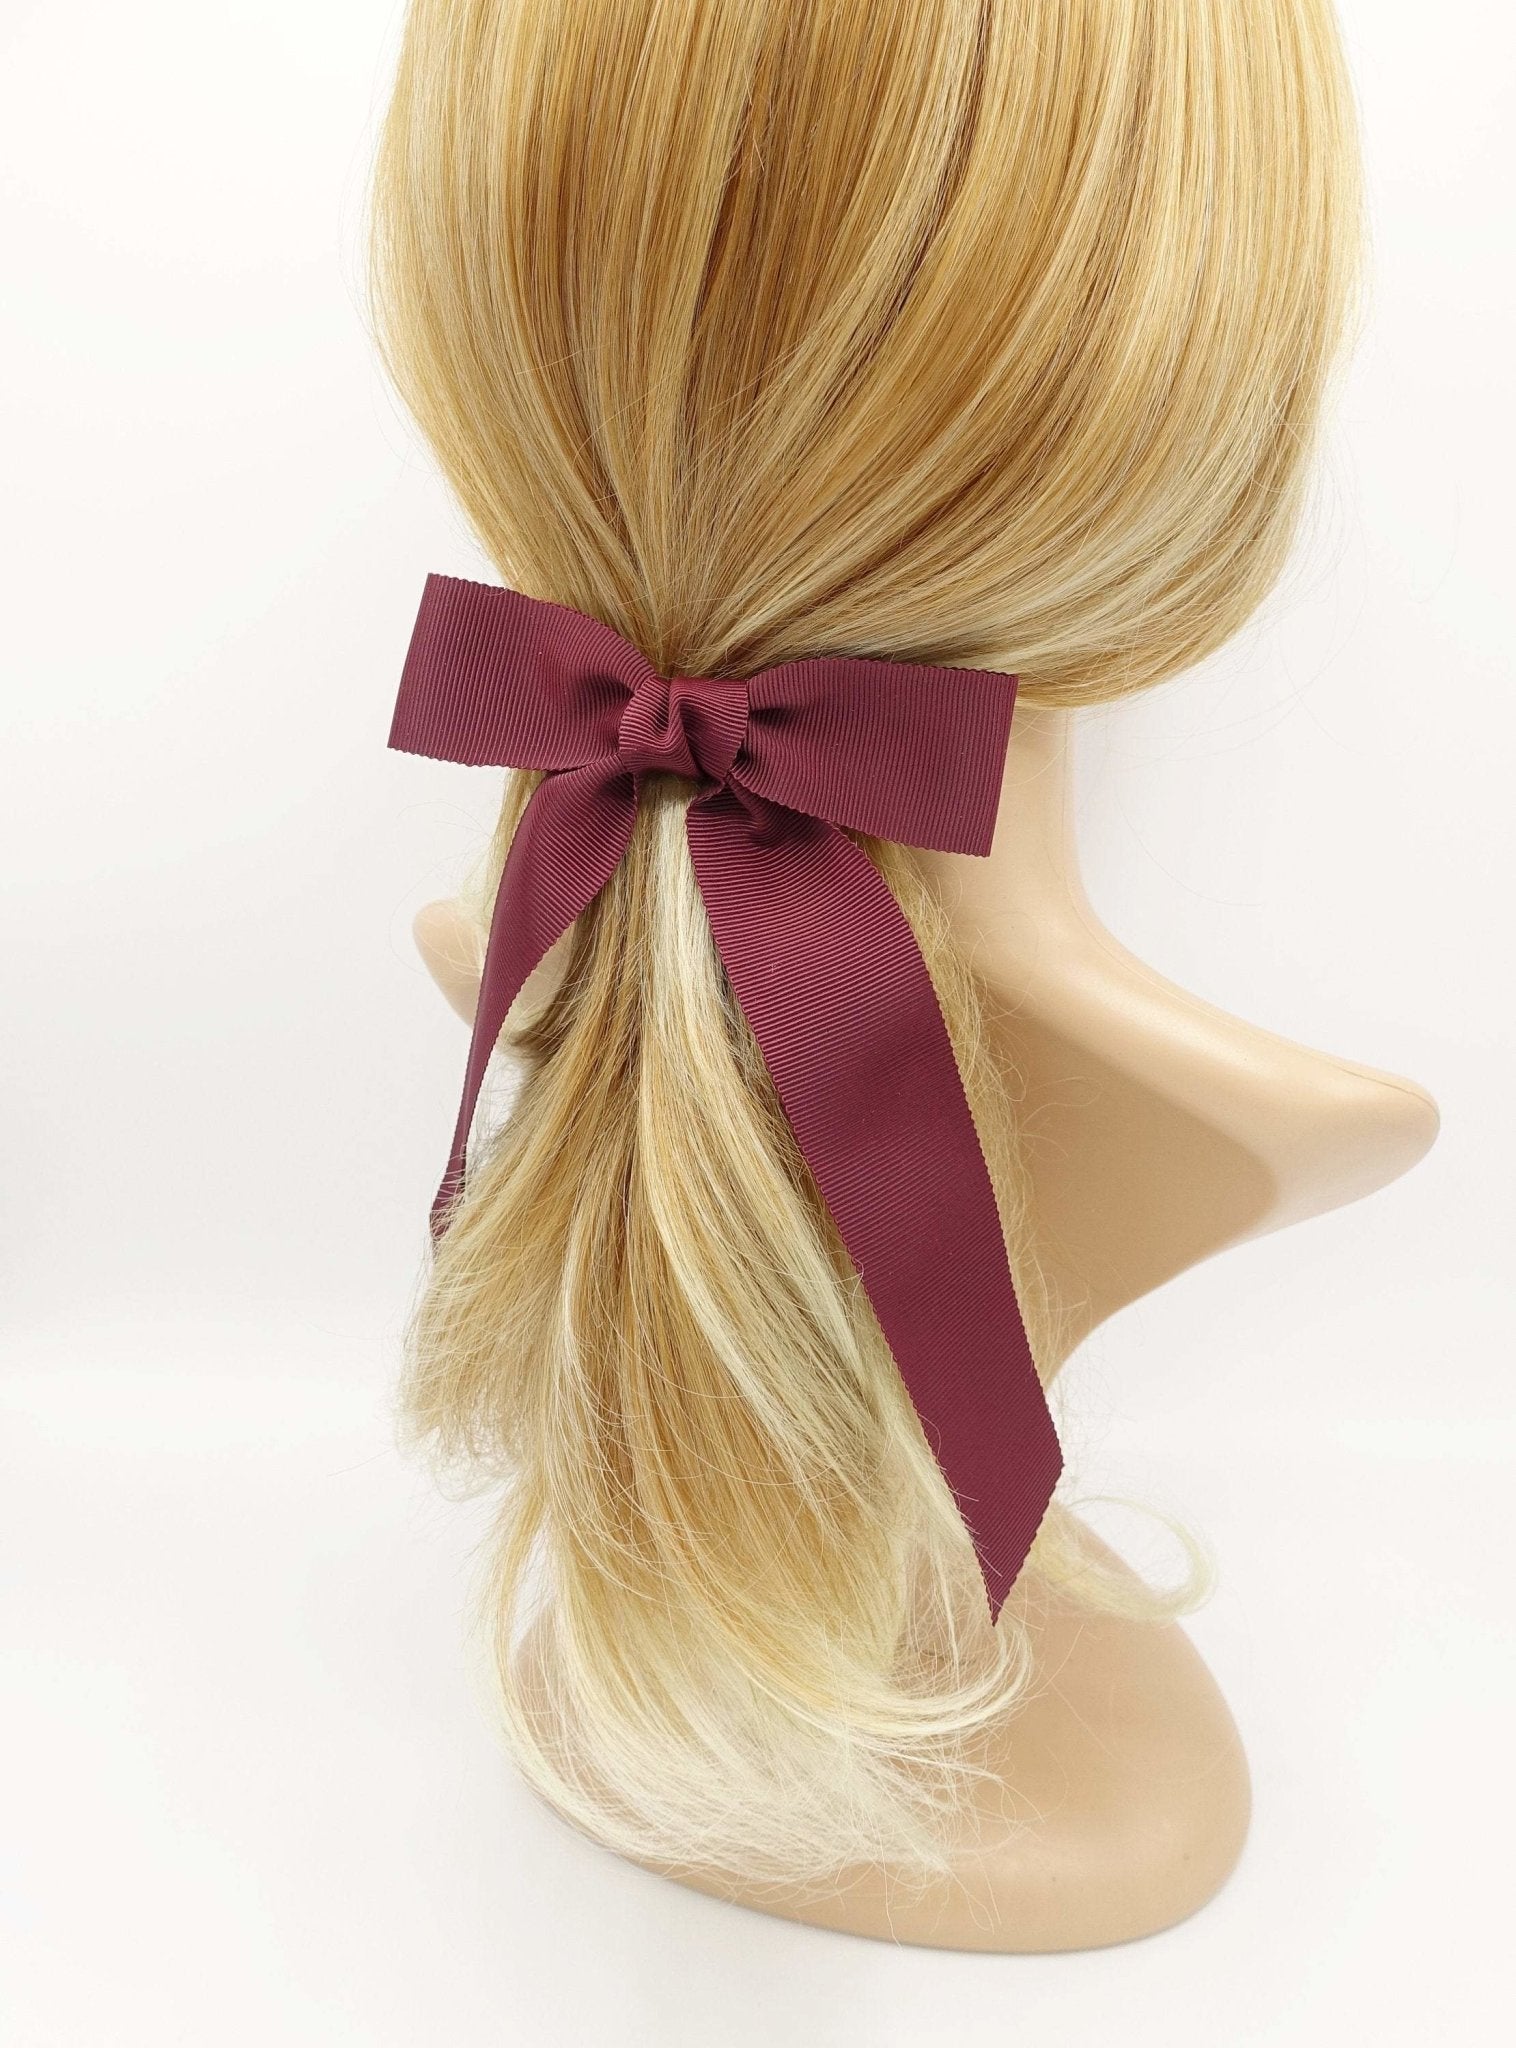 VeryShine claw/banana/barrette Red wine grosgrain tail hair bow basic style hair accessory for women